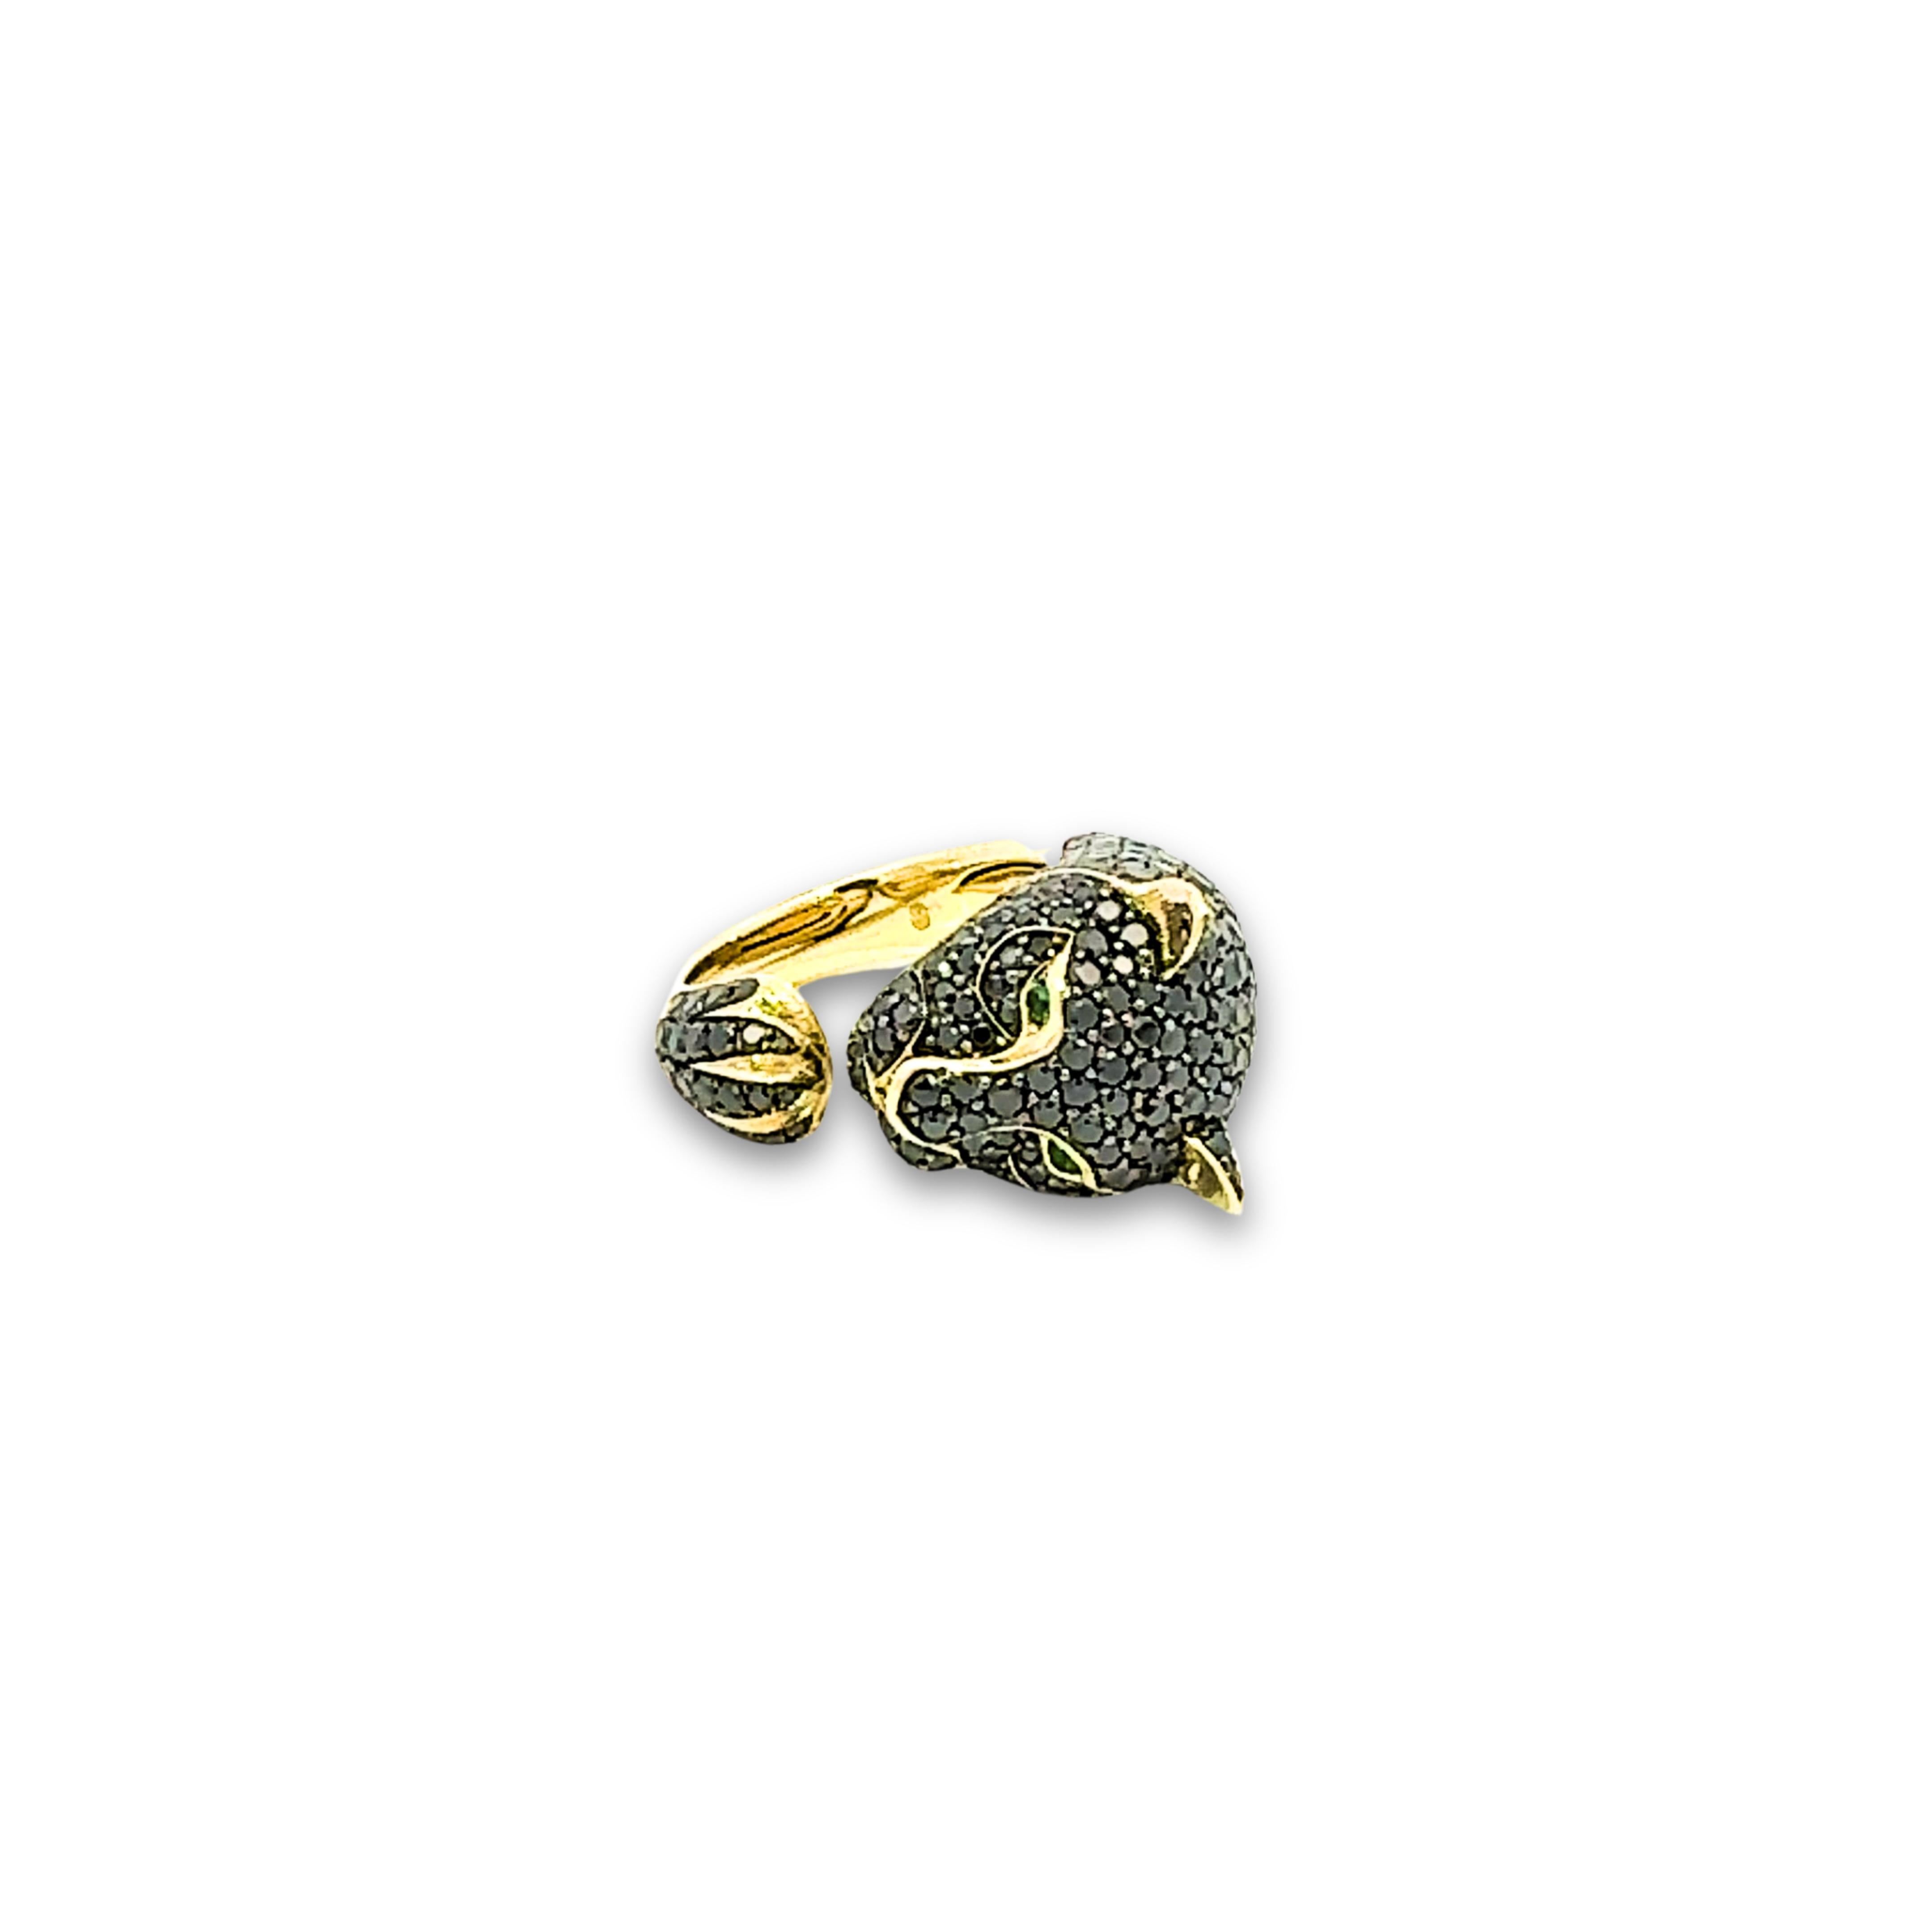 Round Cut Wild Panther Emerald Black Diamond Yellow 18K Exclusive Gold For Sale